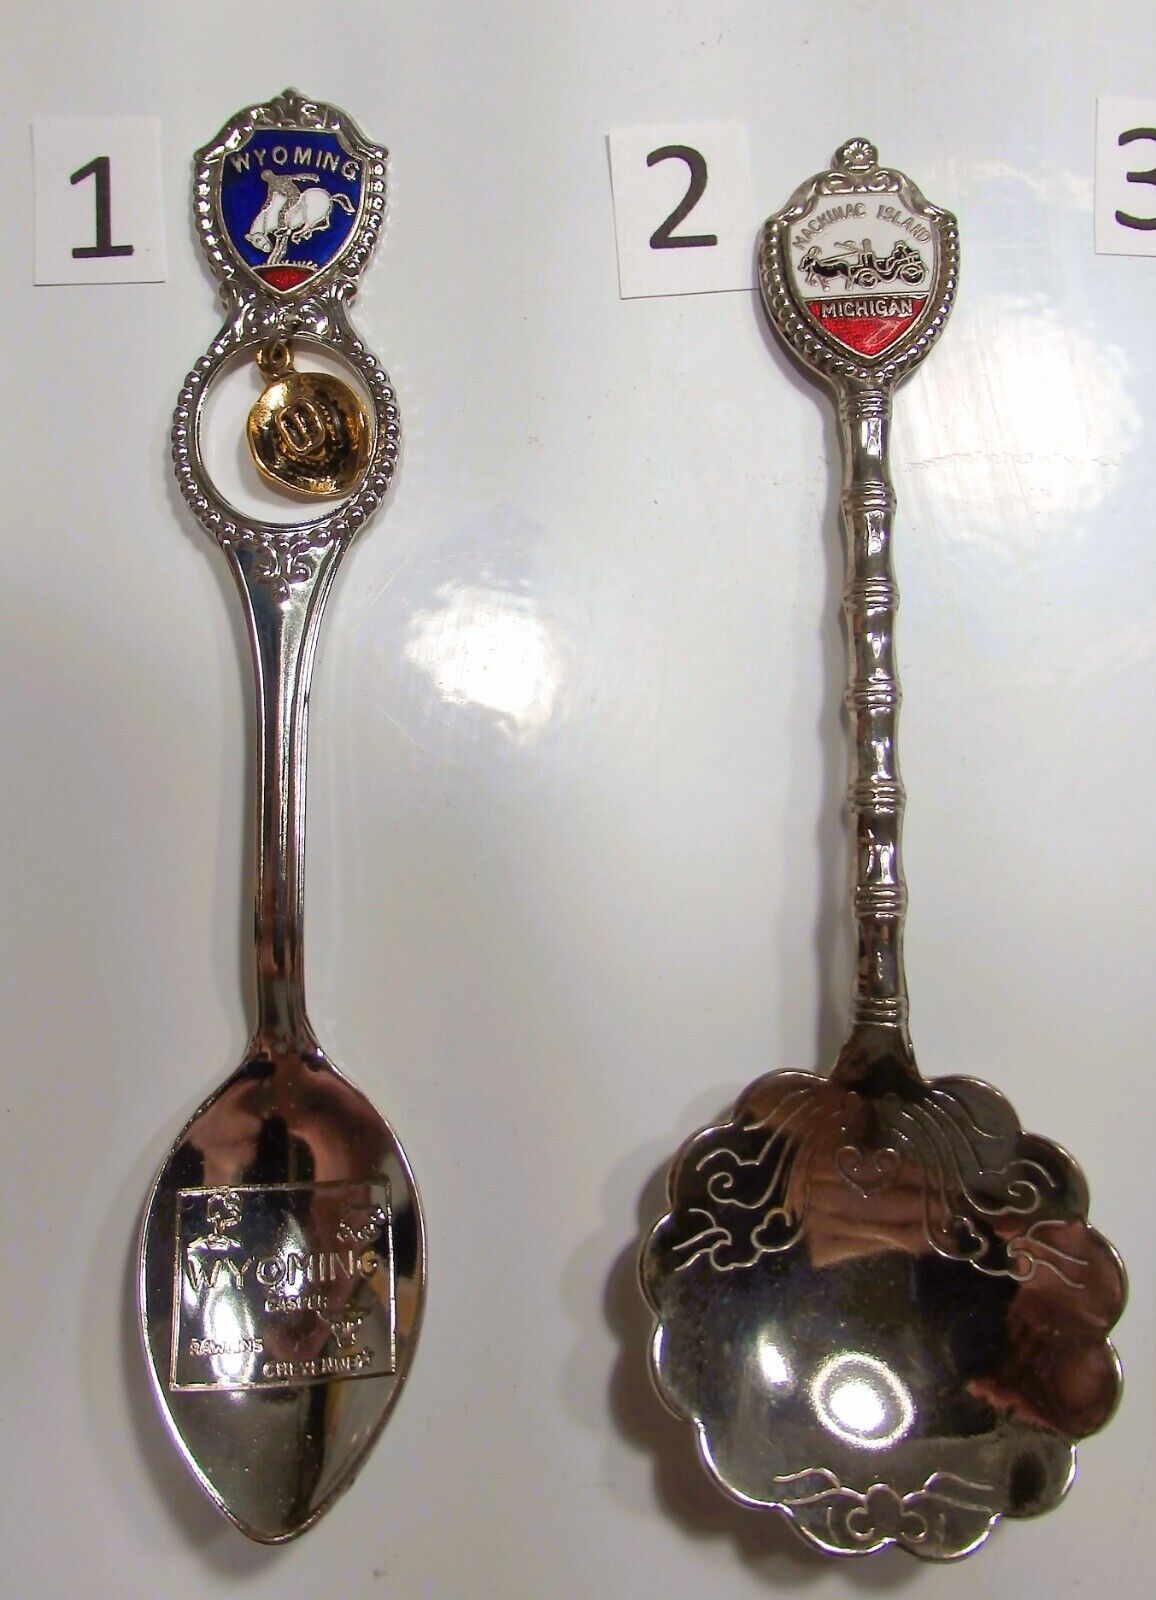 Vintage Souvenir Spoons - Mostly States - Pick Your Spoons - # 1